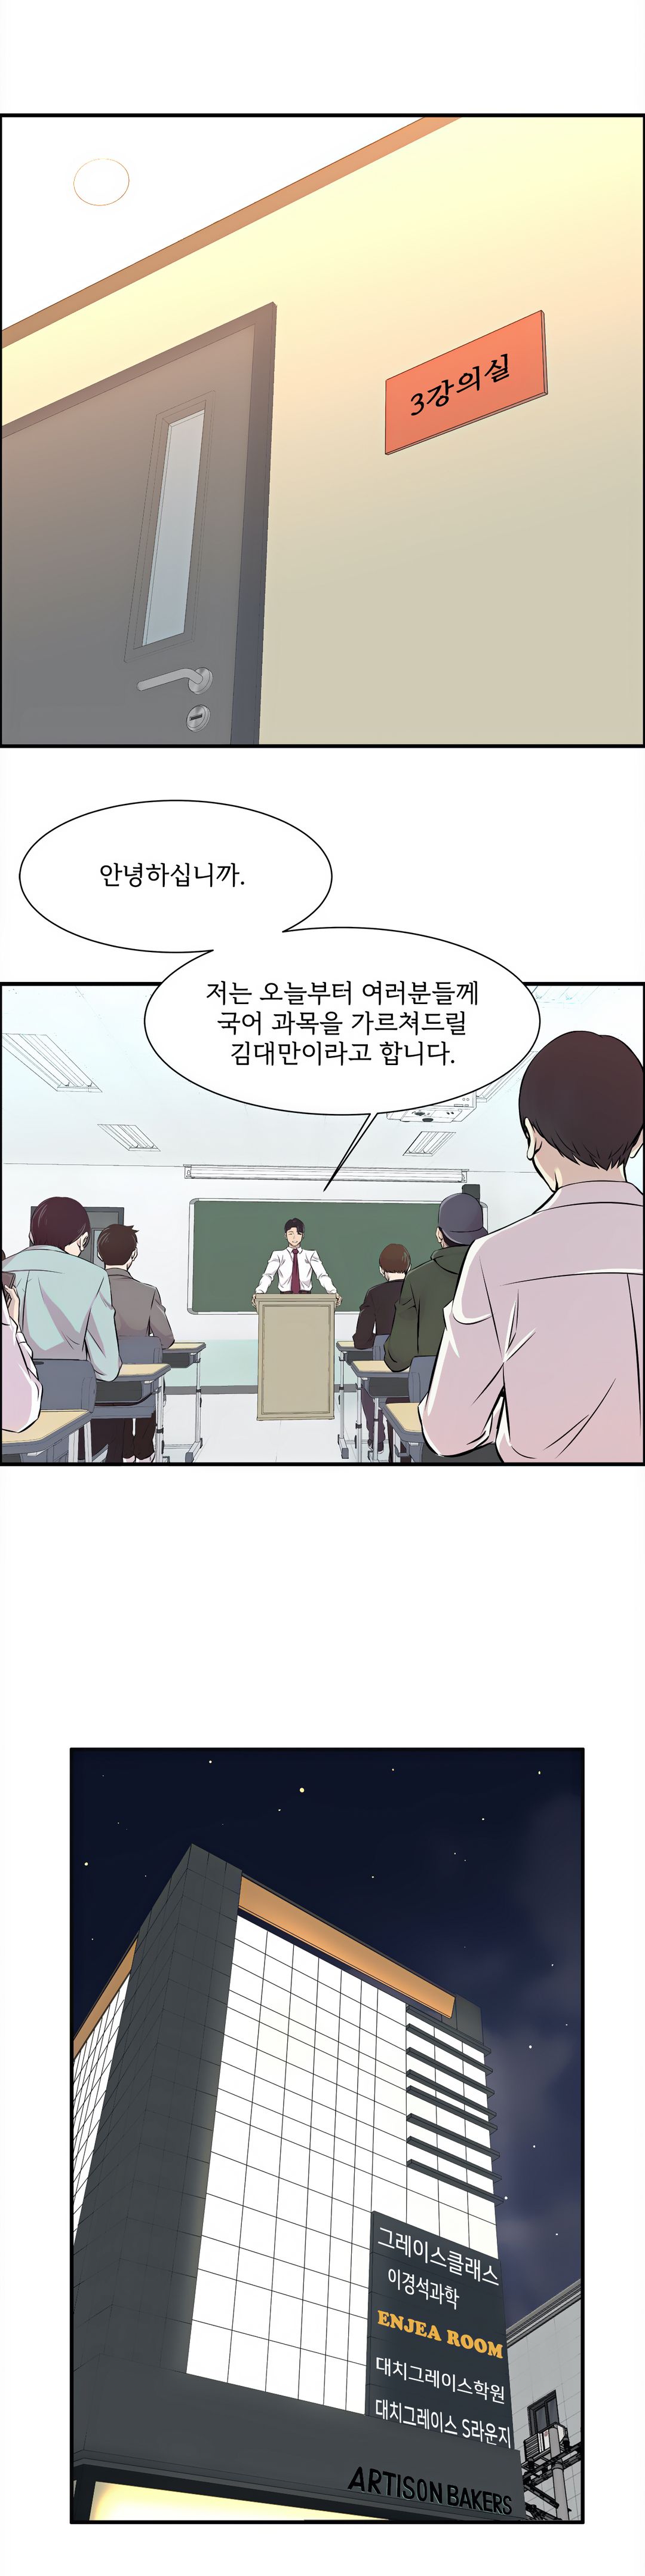 Cram School Scandal Raw - Chapter 2 Page 14